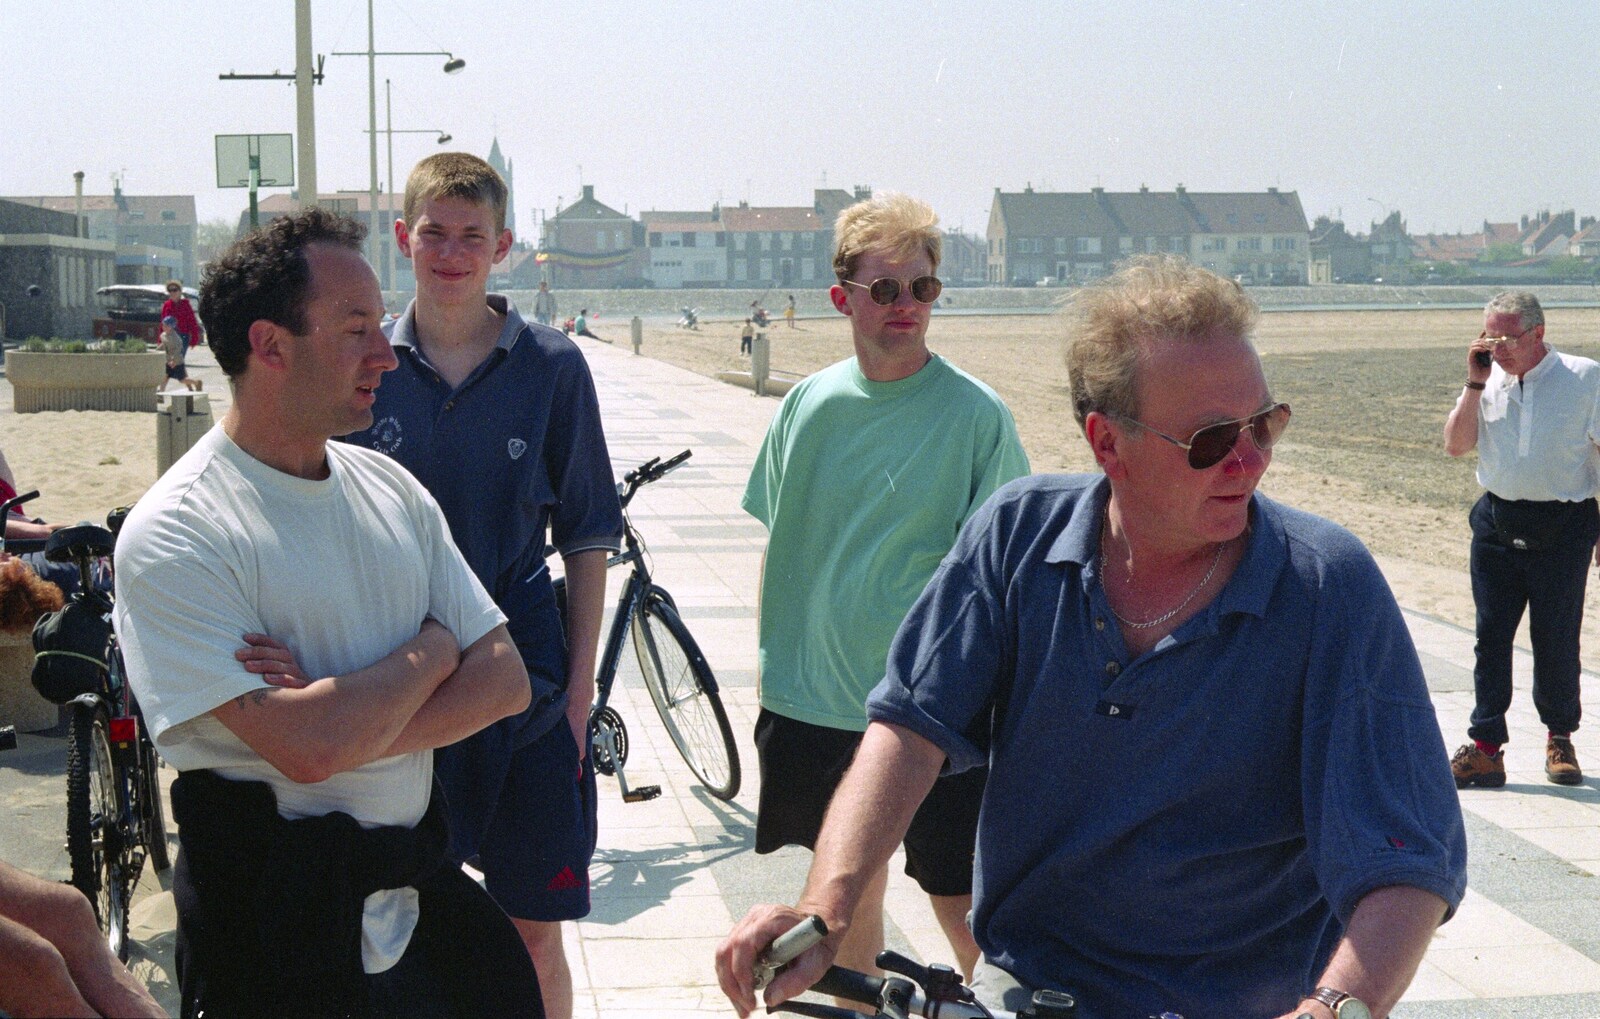 DH, Phil, Paul, John Willy and Bomber Langdon from A BSCC Bike Ride to Gravelines, Pas de Calais, France - 11th May 2000